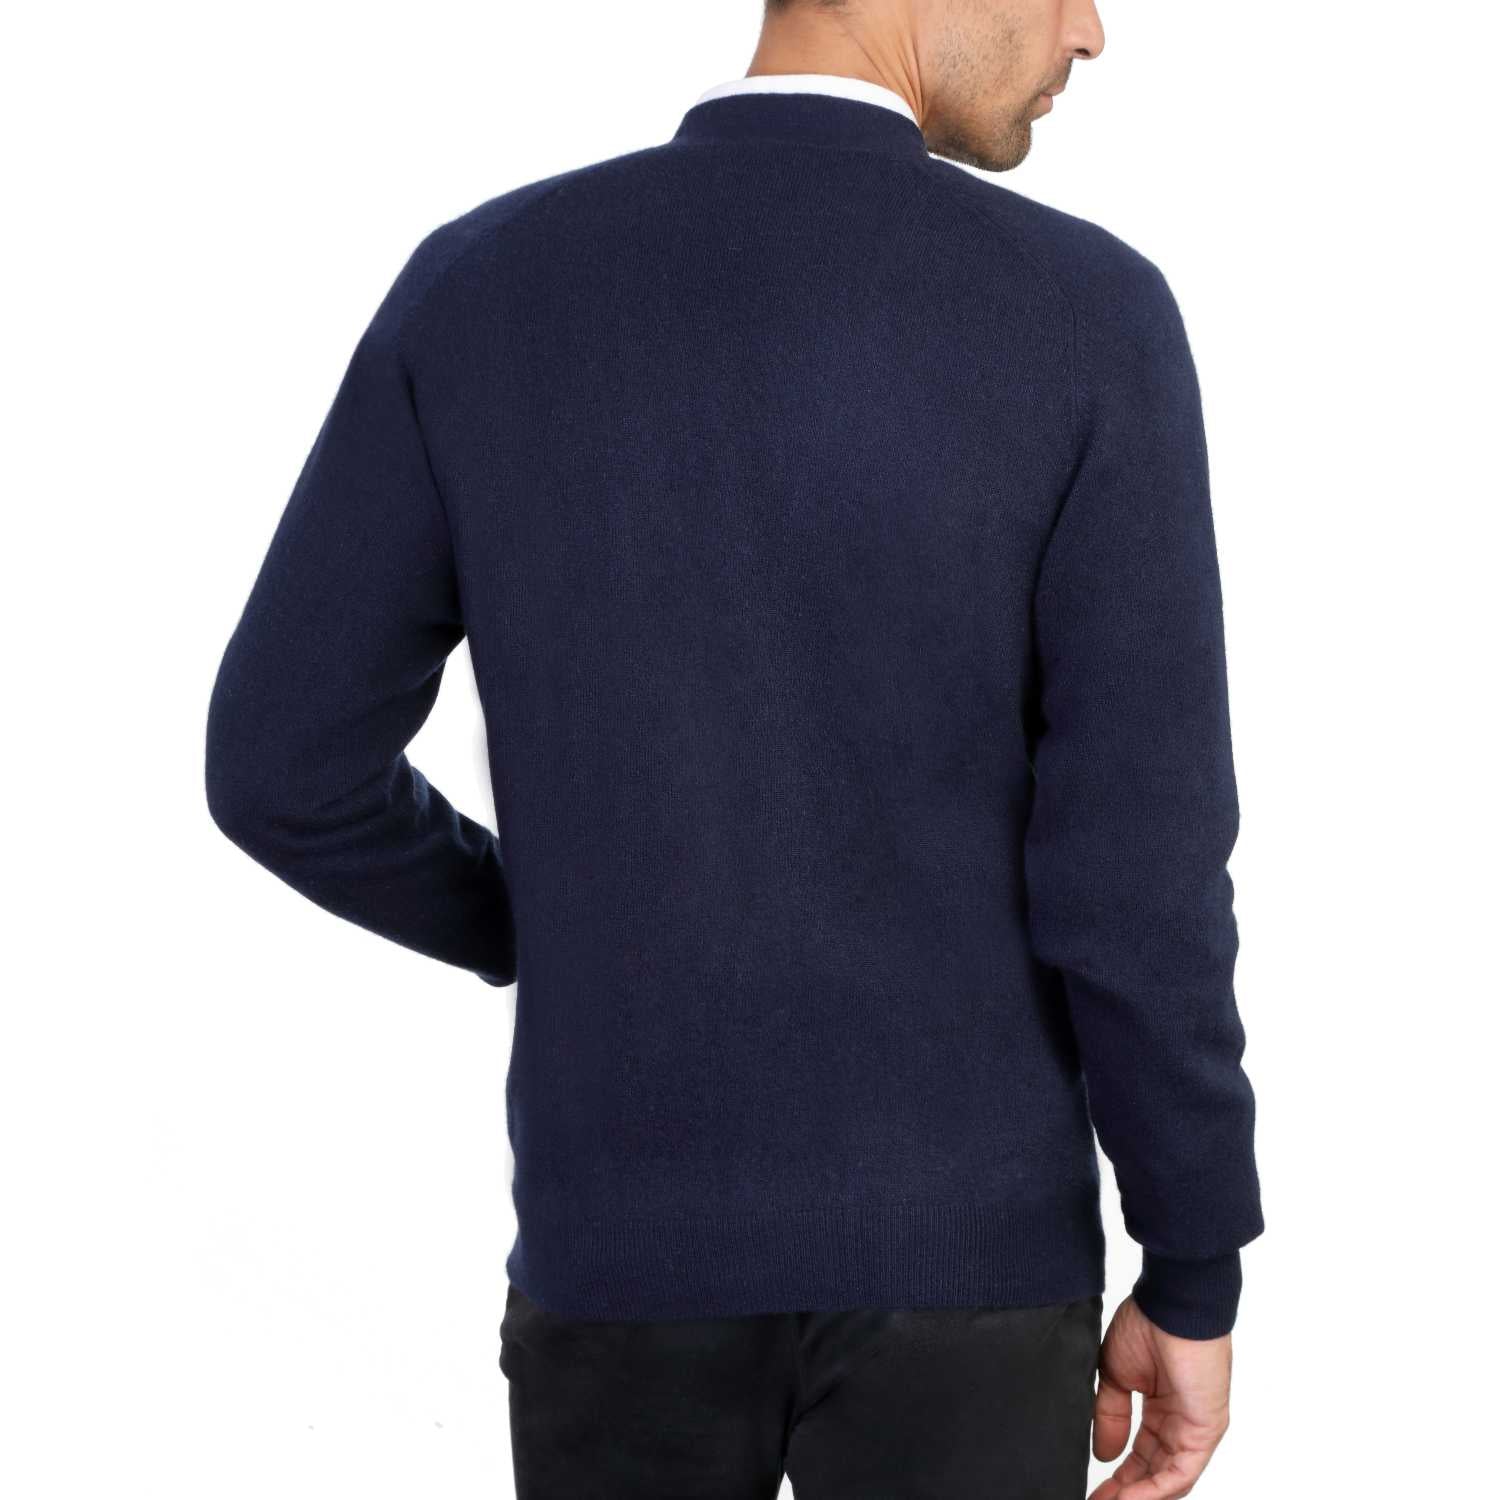 Mens Navy Blue Cashmere Round Neck Sweater | Back | Shop at The Cashmere Choice | London